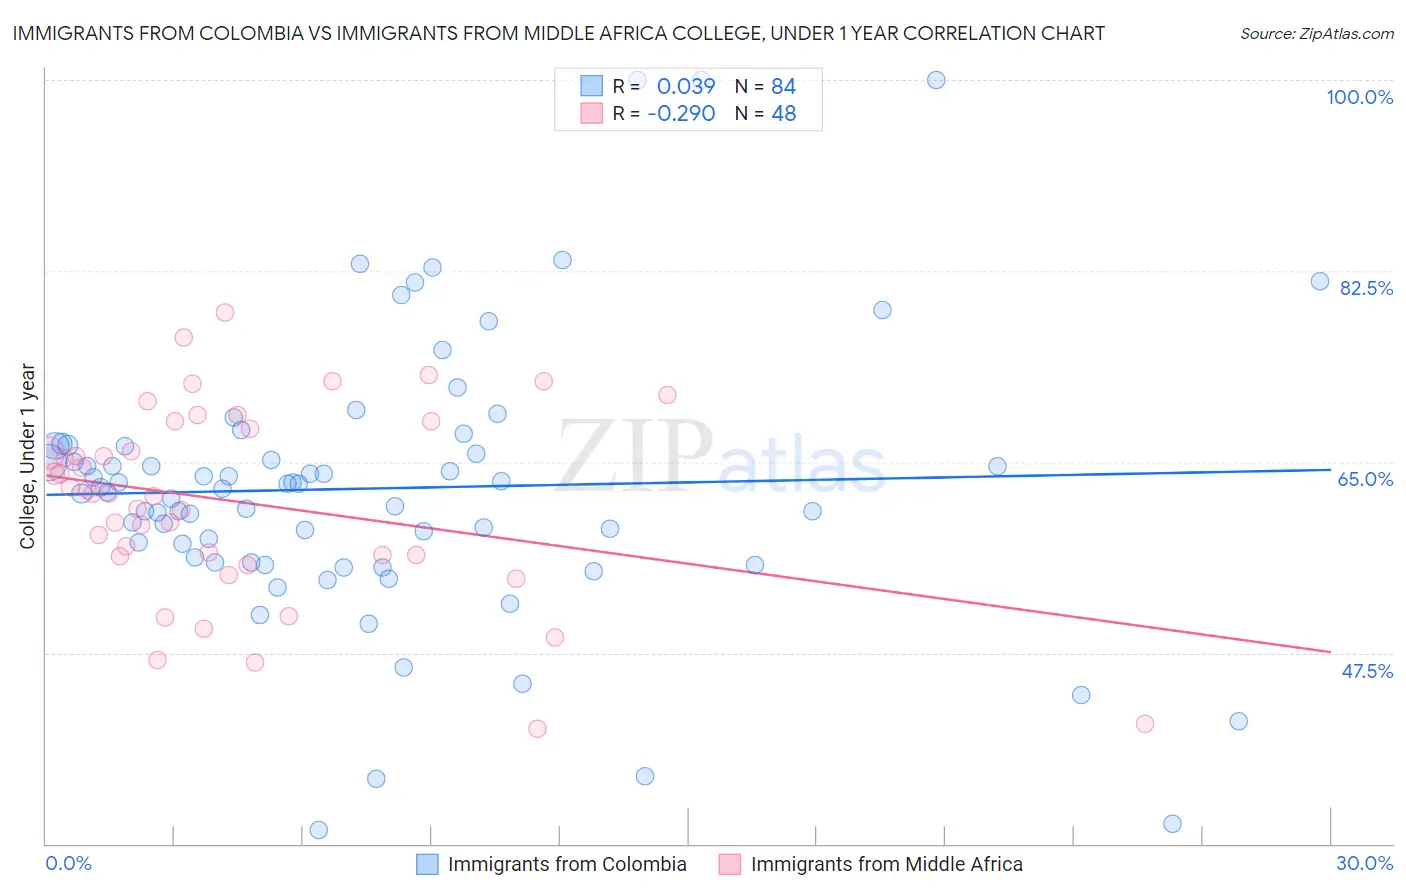 Immigrants from Colombia vs Immigrants from Middle Africa College, Under 1 year